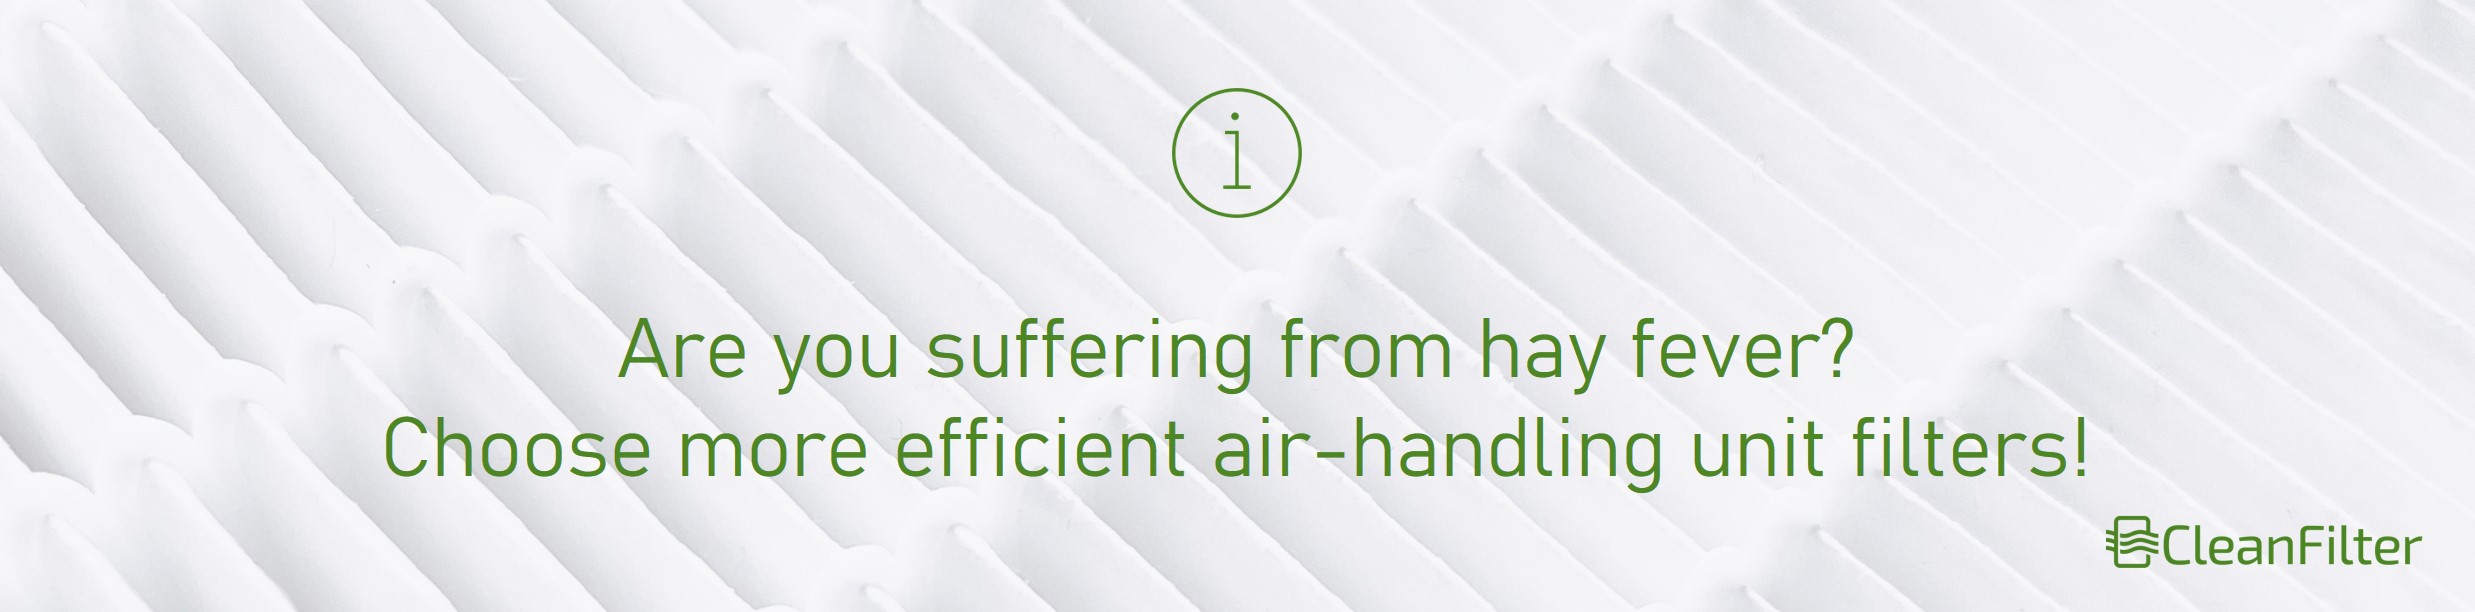 Are you suffering from hay fever? Choose more efficient air-handling unit filters!